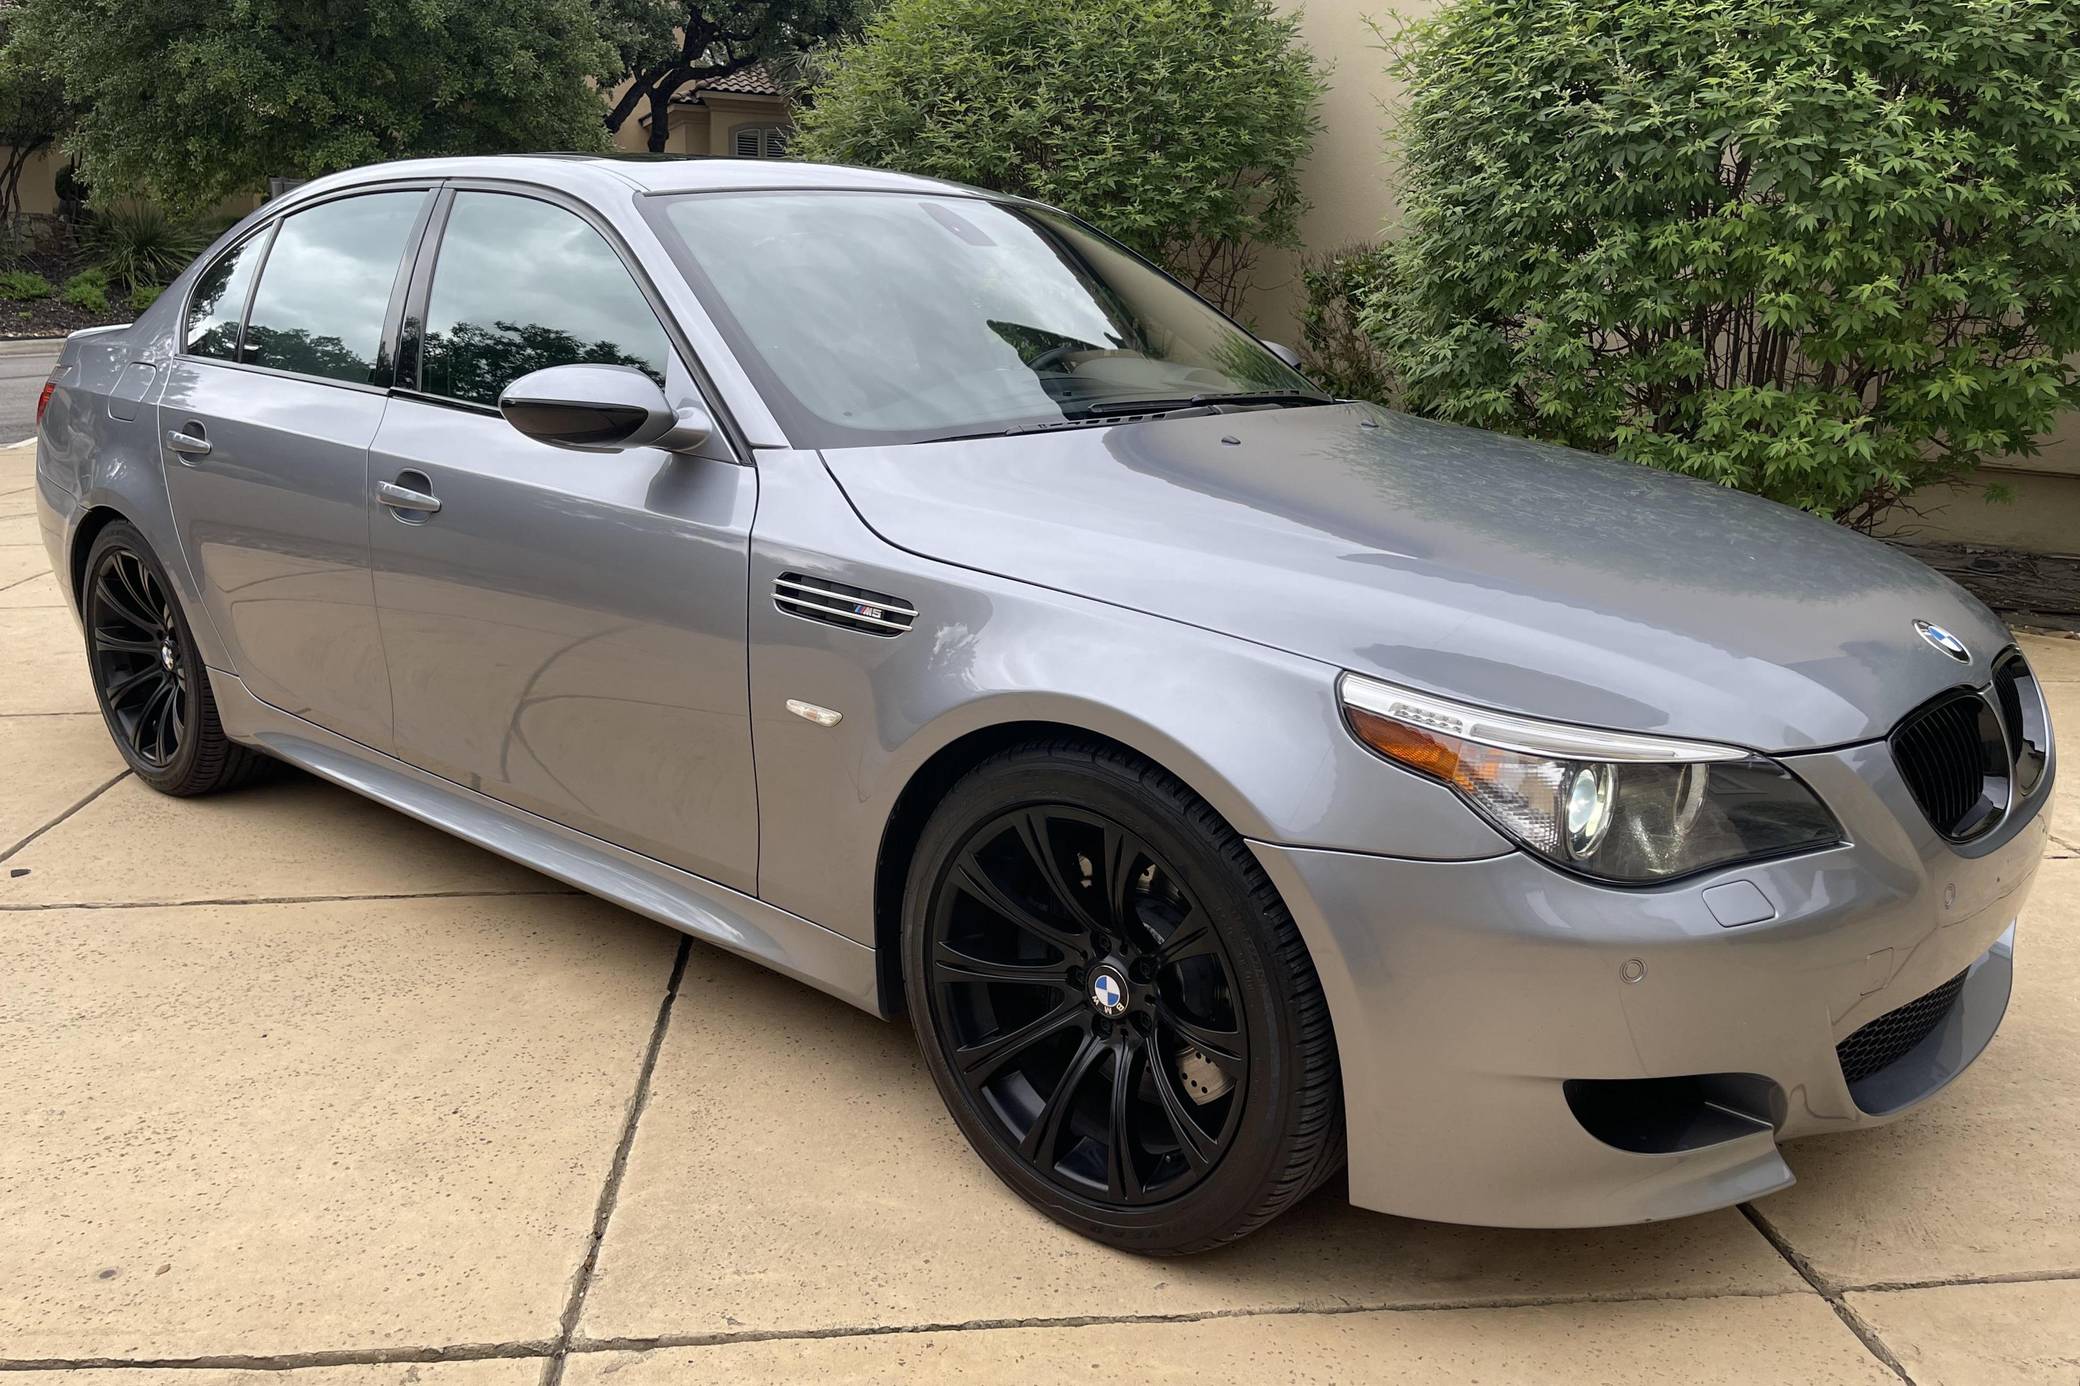 New and Used 2005 to 2006 BMW M5 For Sale